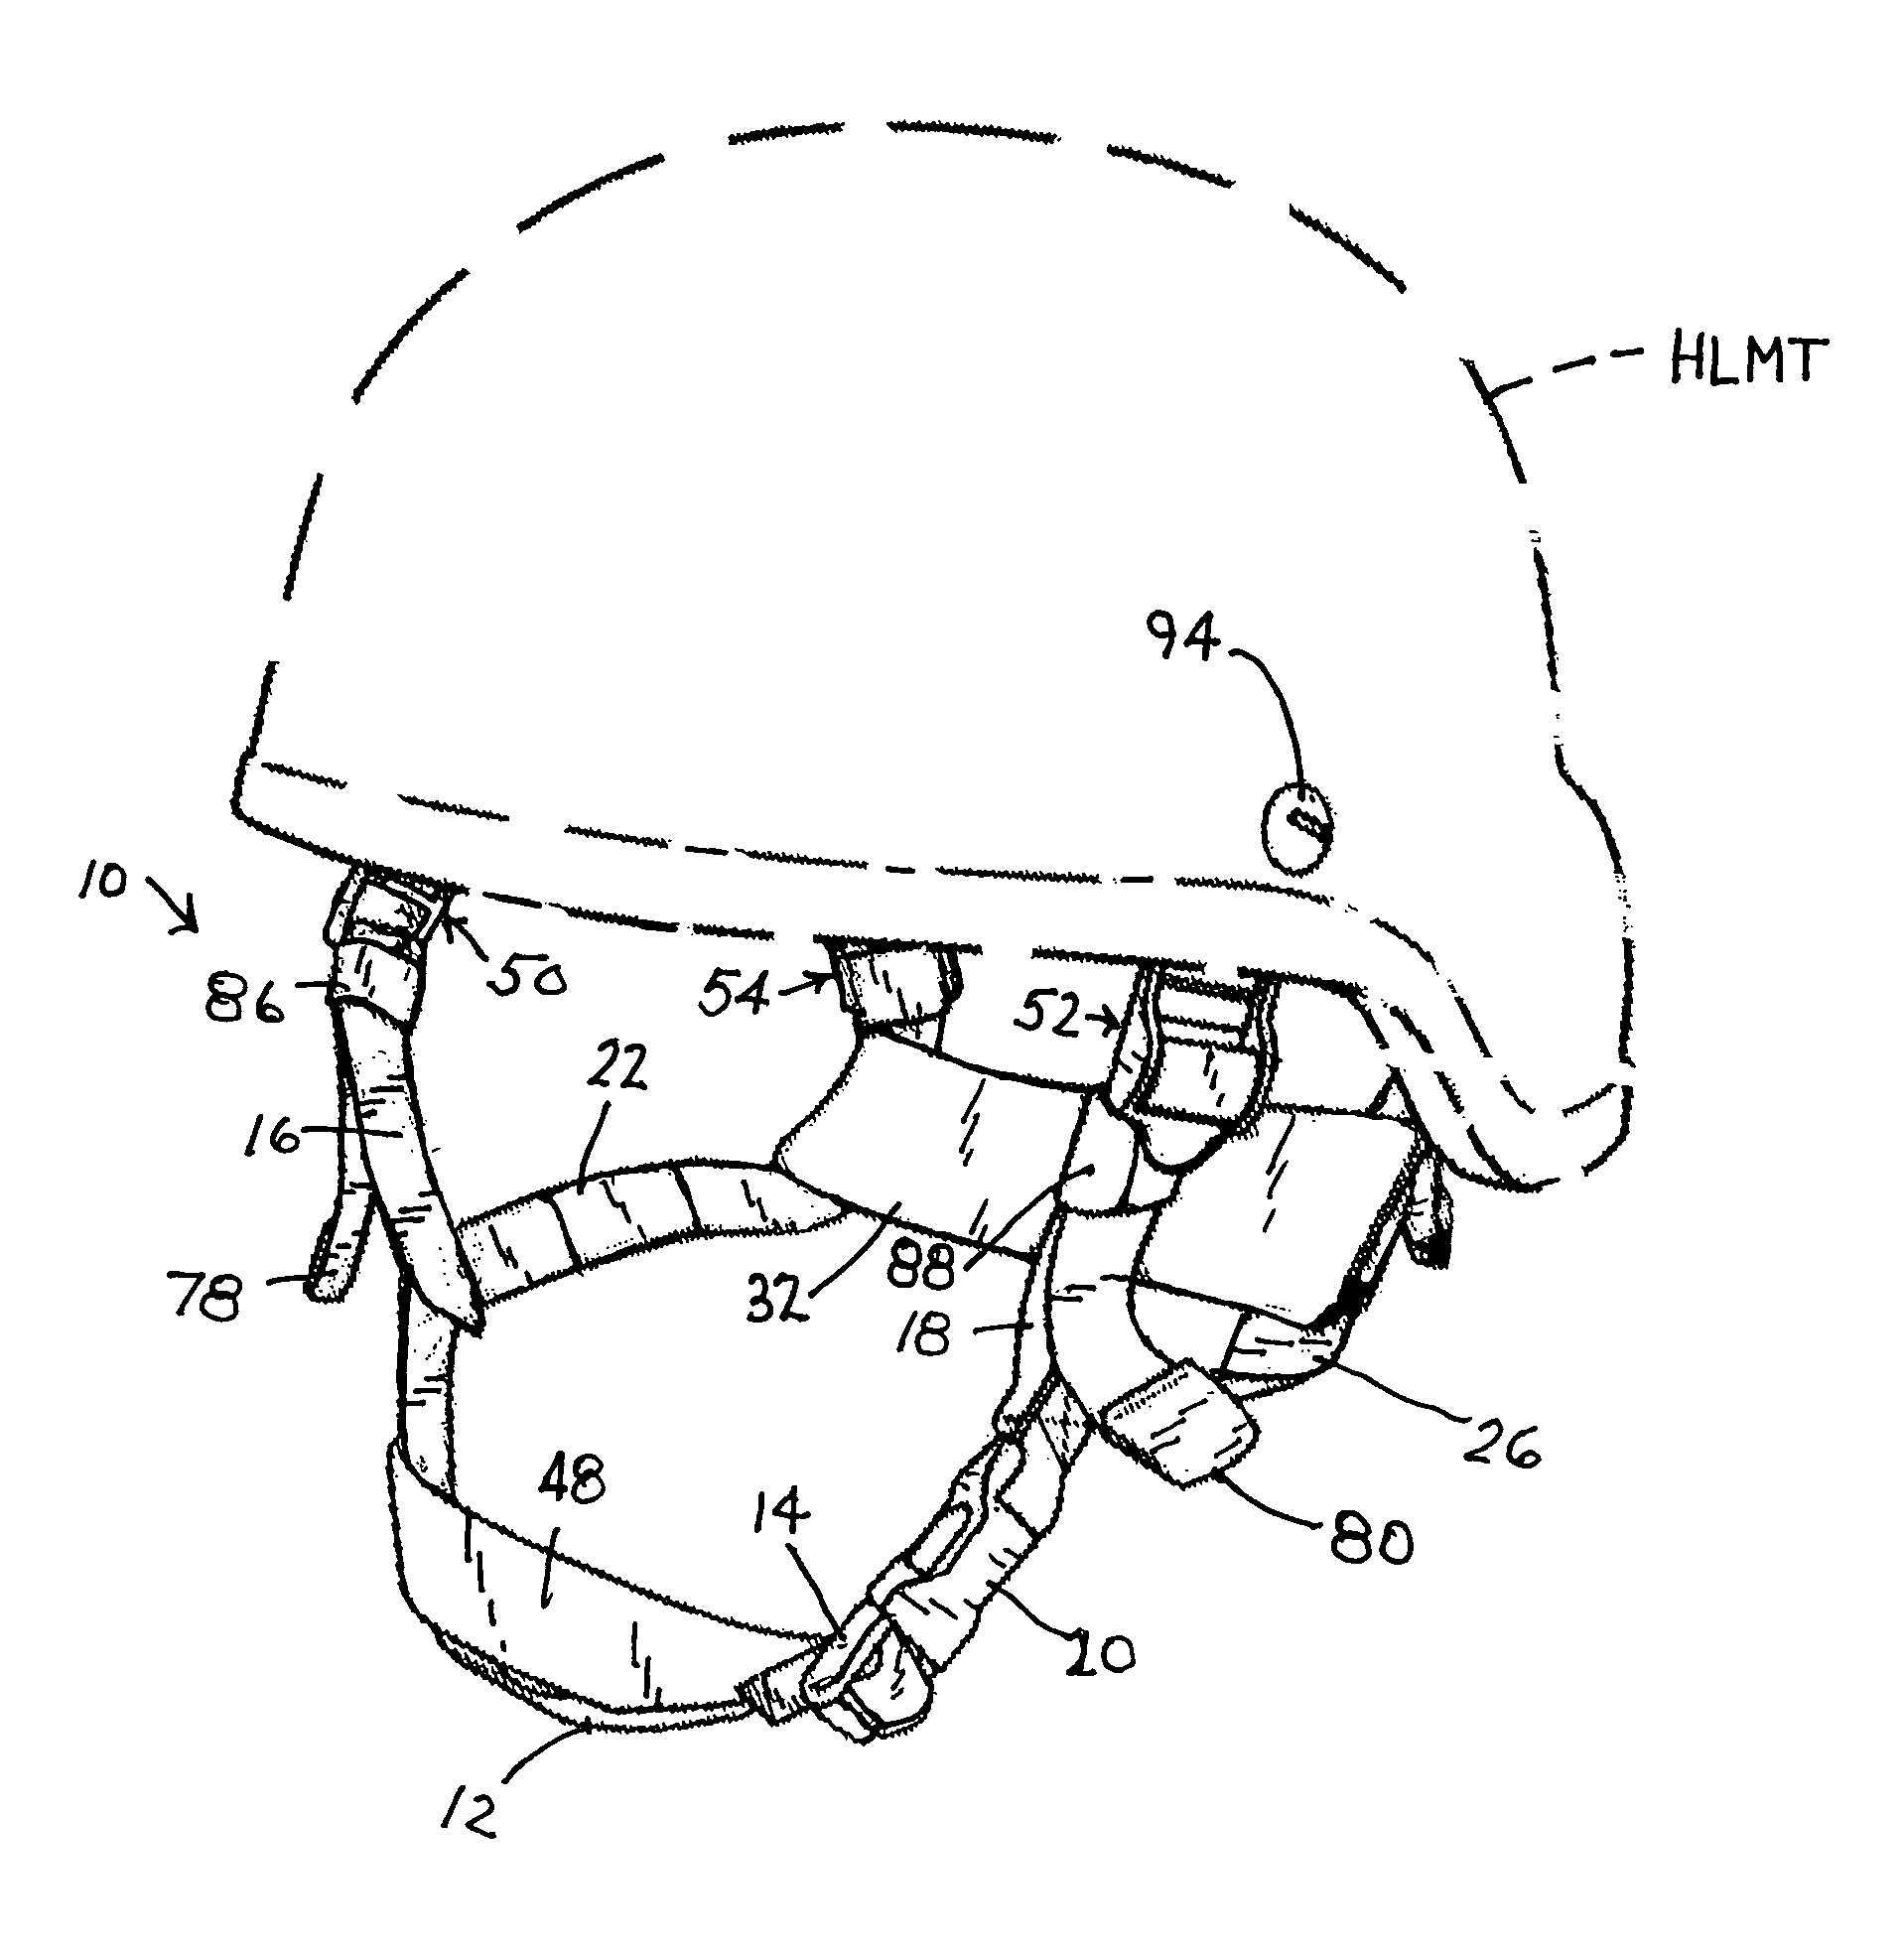 Chin strap assembly for helmet